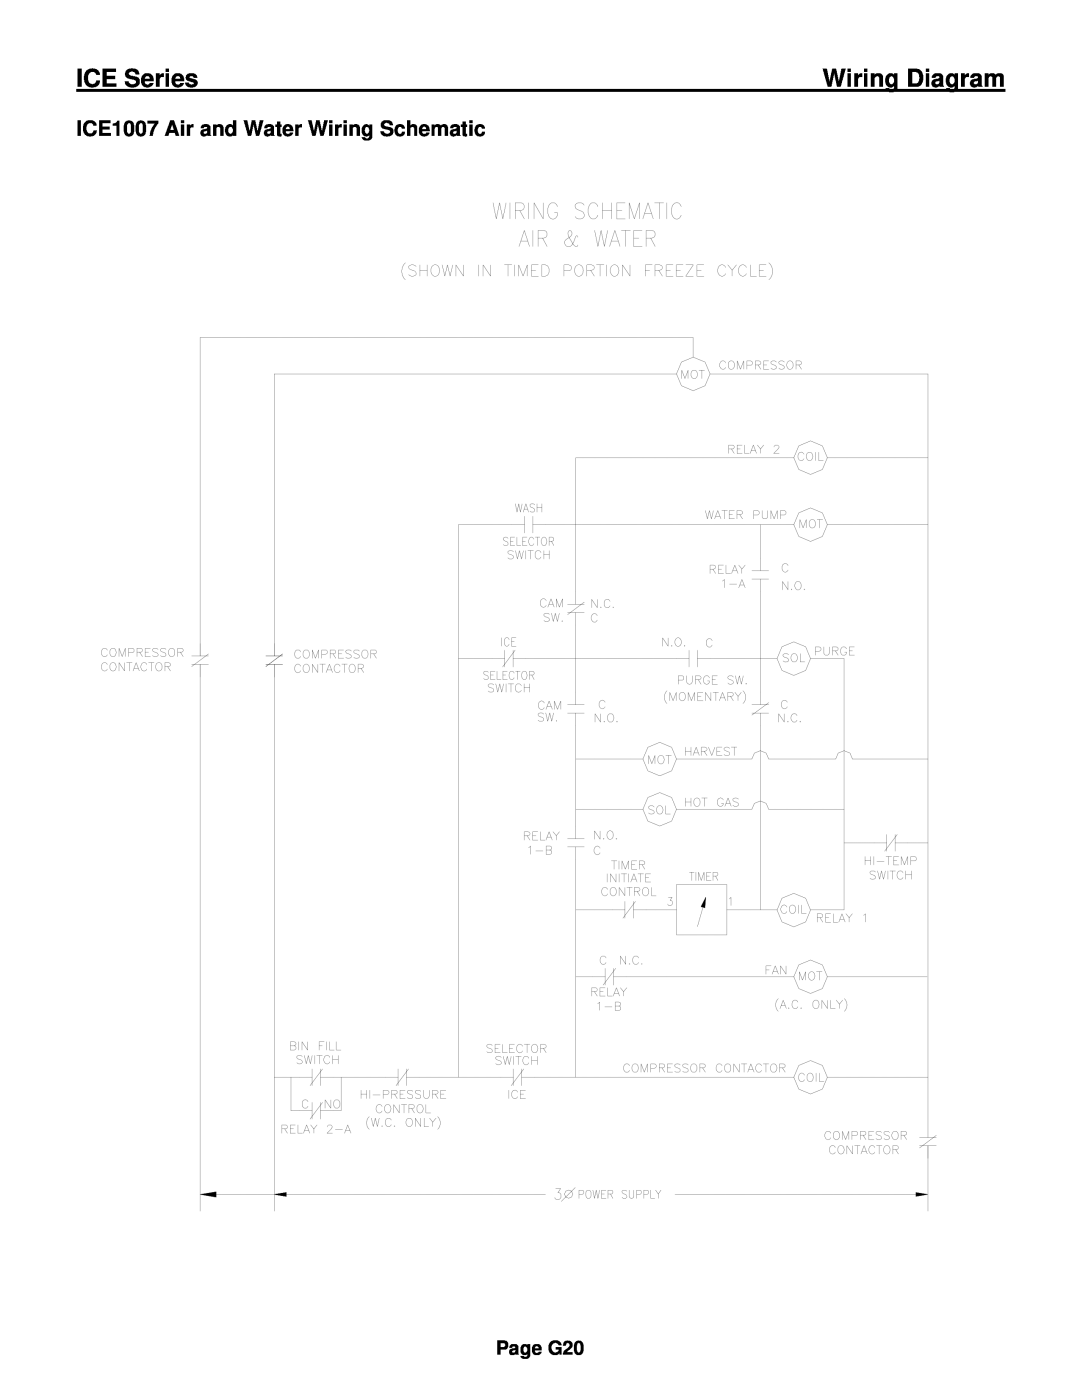 Ice-O-Matic ICE0250 Series installation manual ICE1007 Air and Water Wiring Schematic, ICE Series, Wiring Diagram, Page G20 